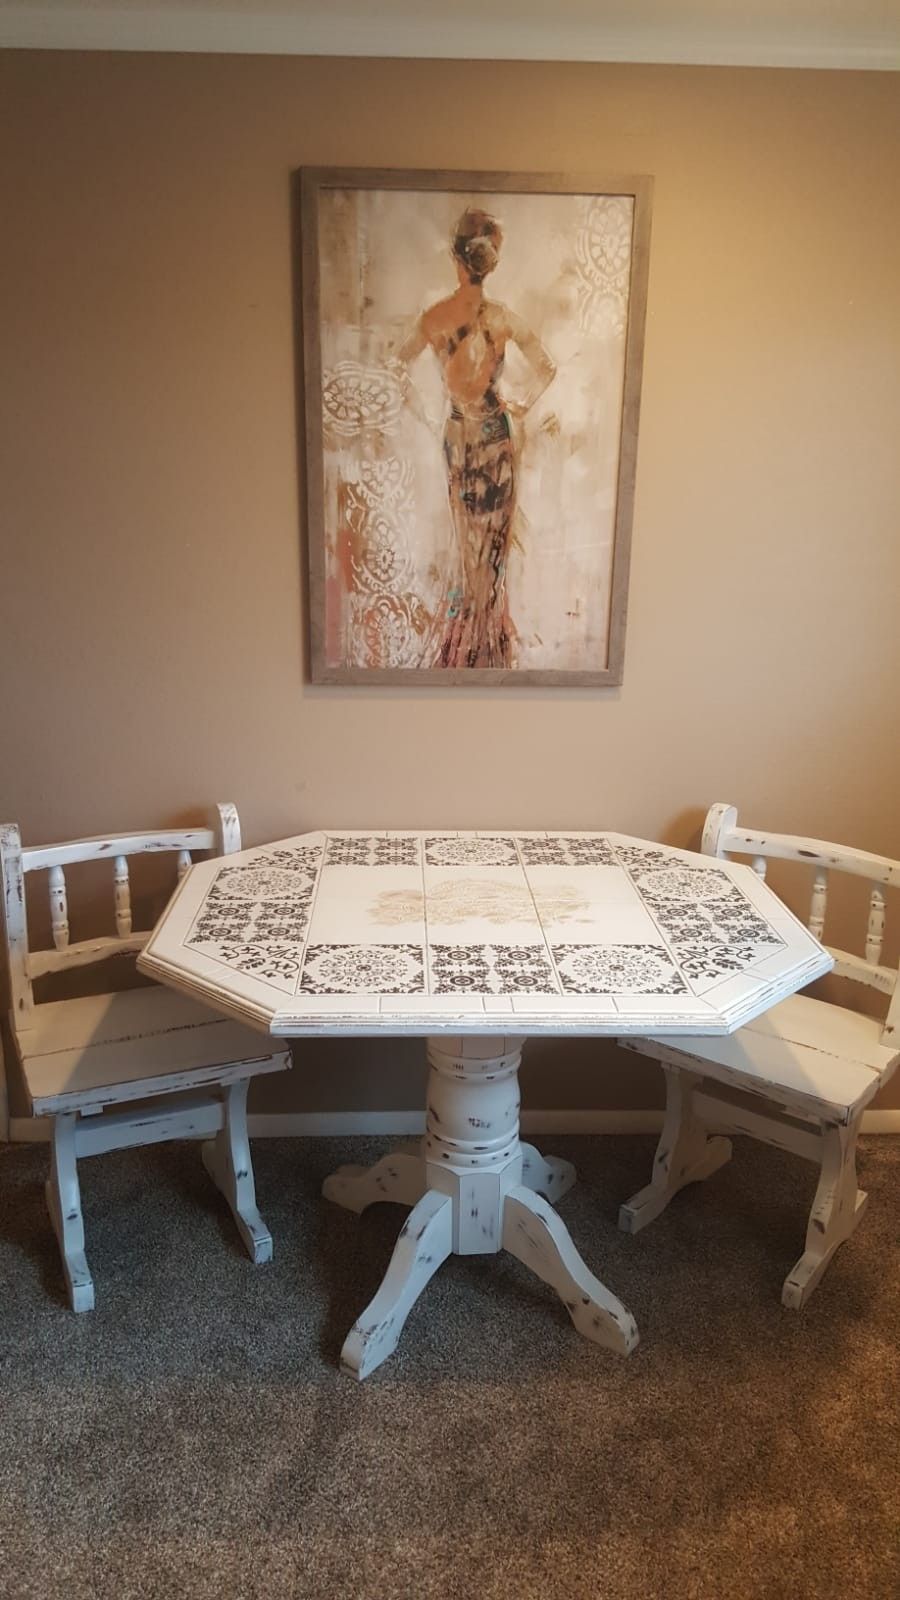 Shabby Chic Table and Chairs